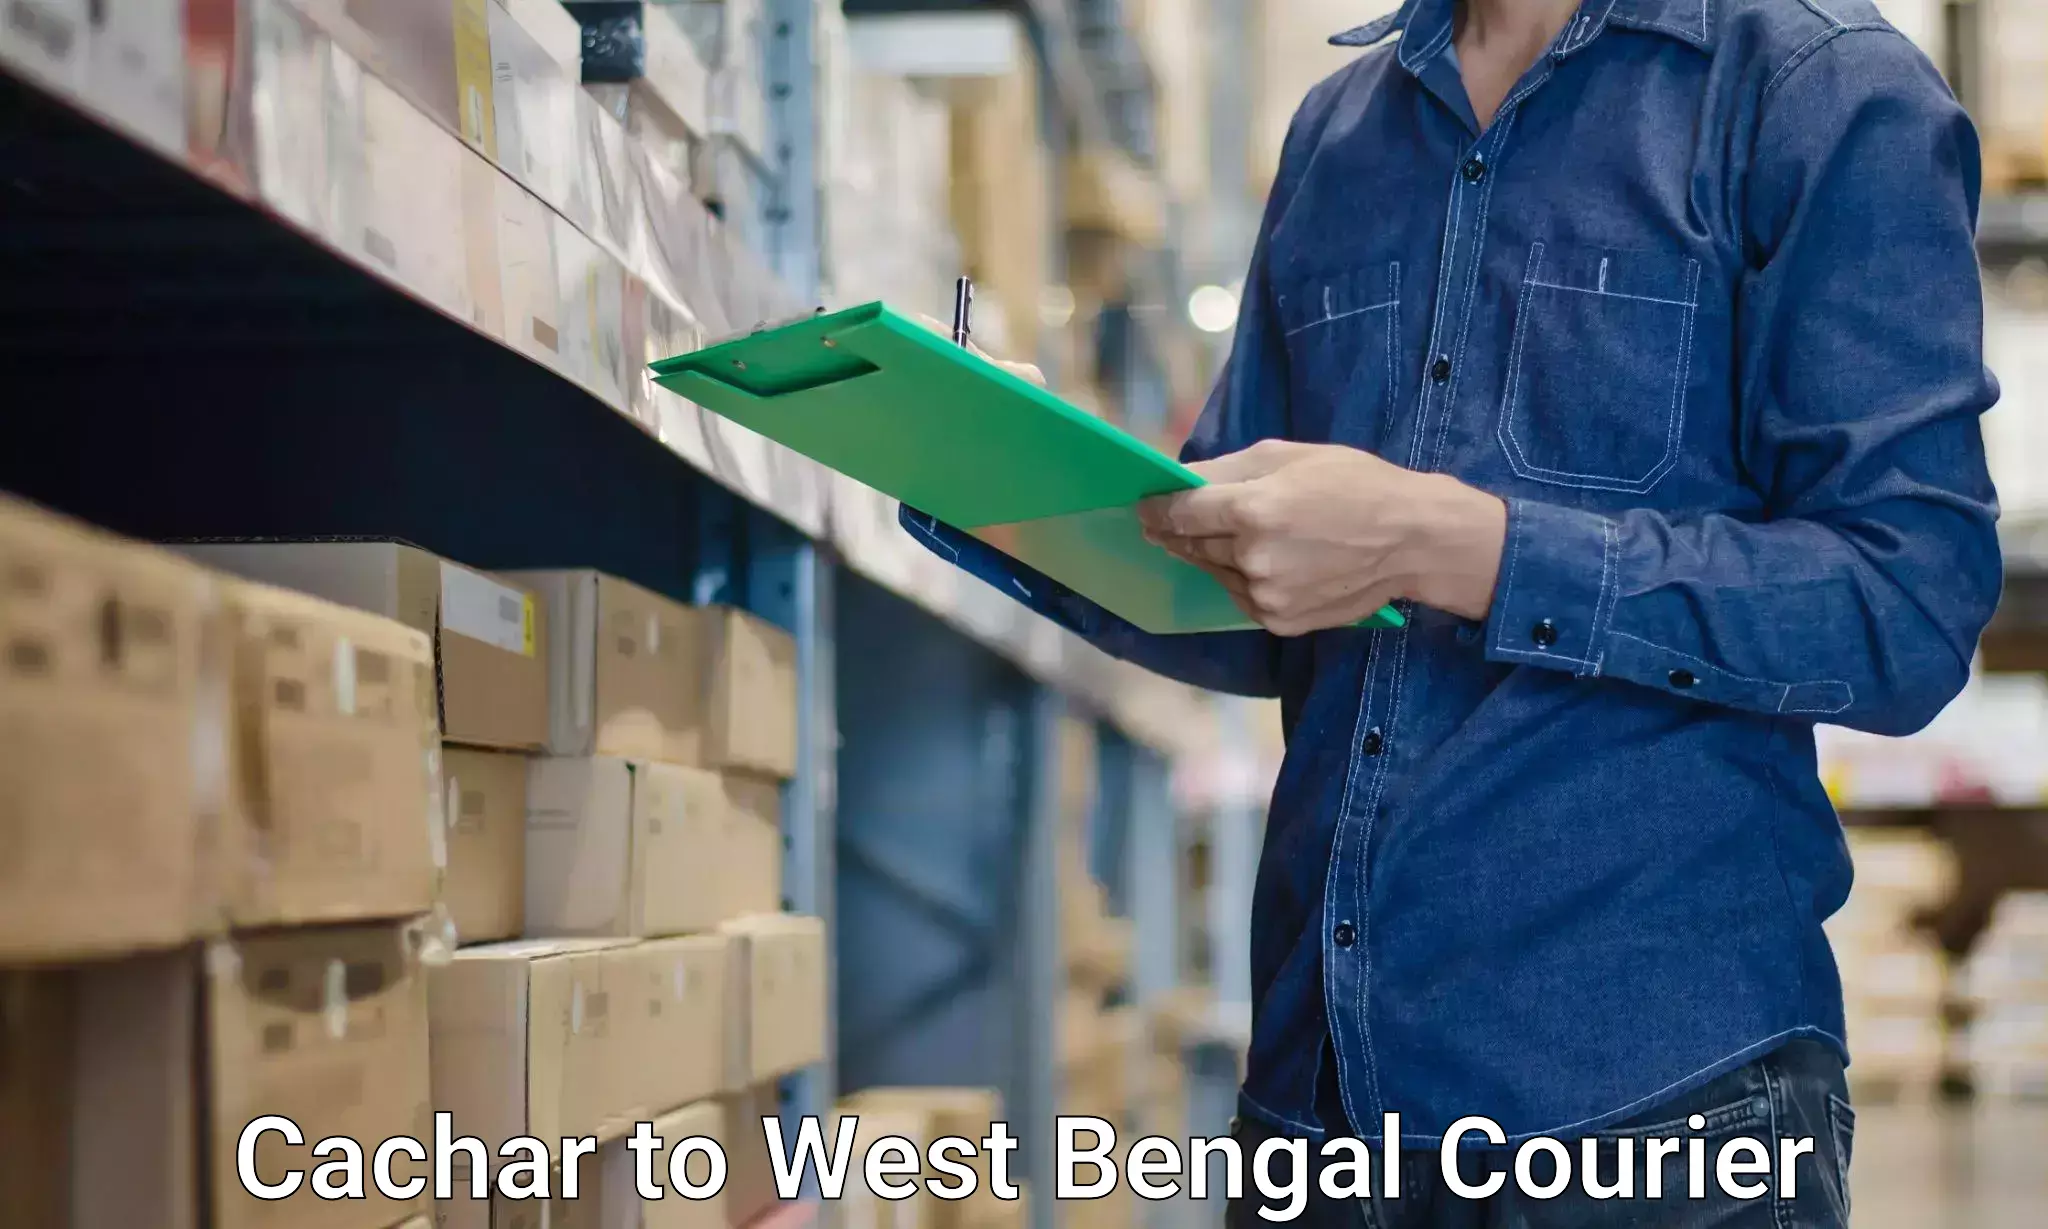 Household moving experts Cachar to West Bengal